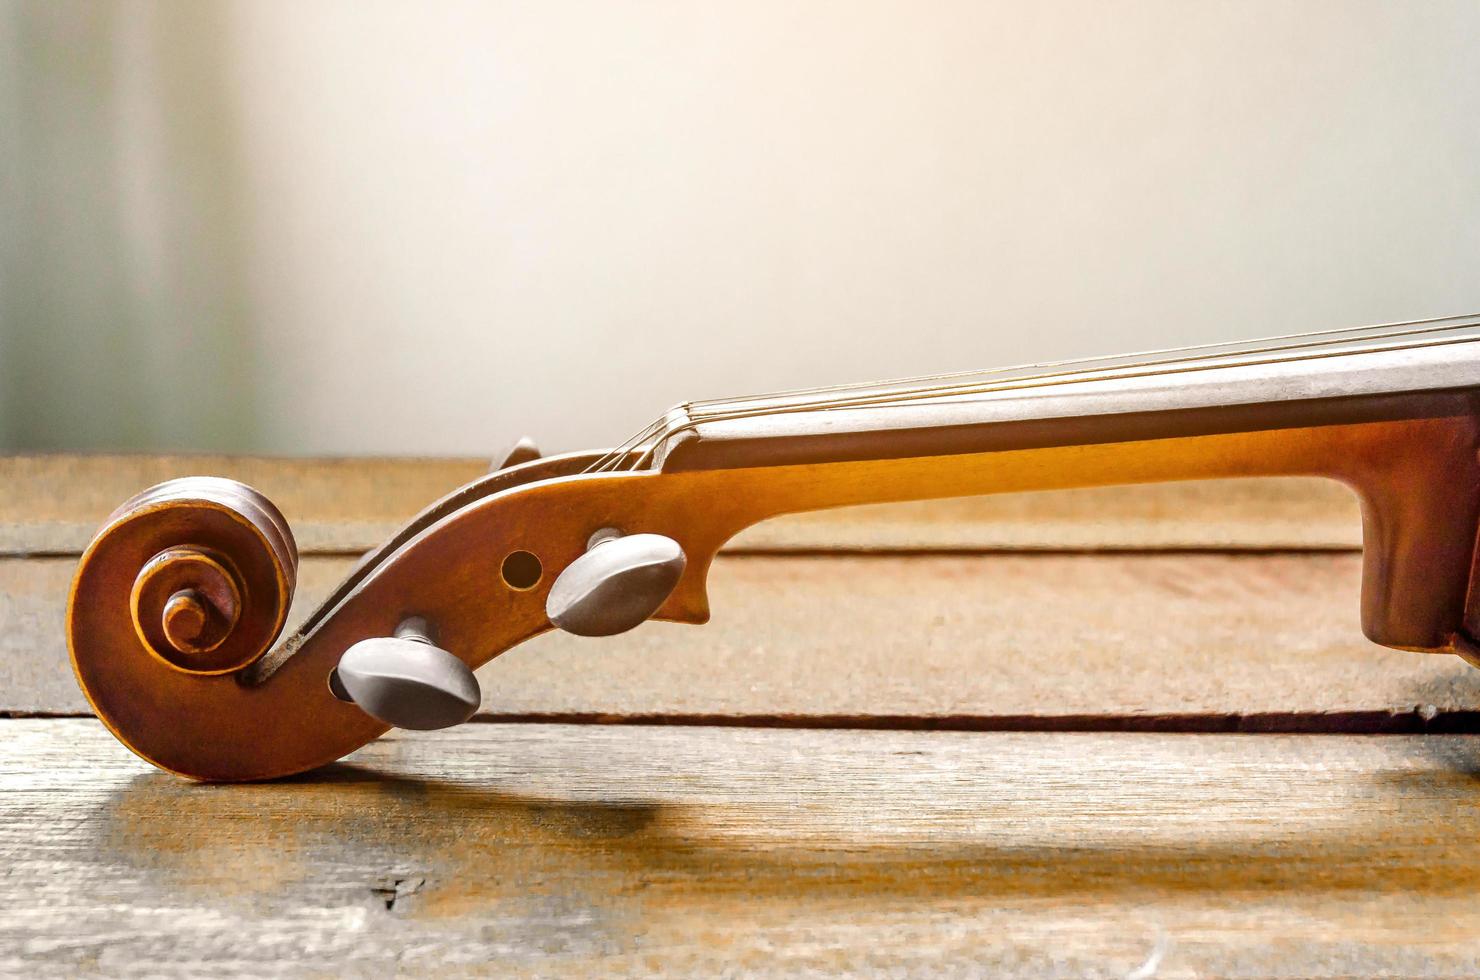 The violin on the table, Close up of violin on the wooden floo photo